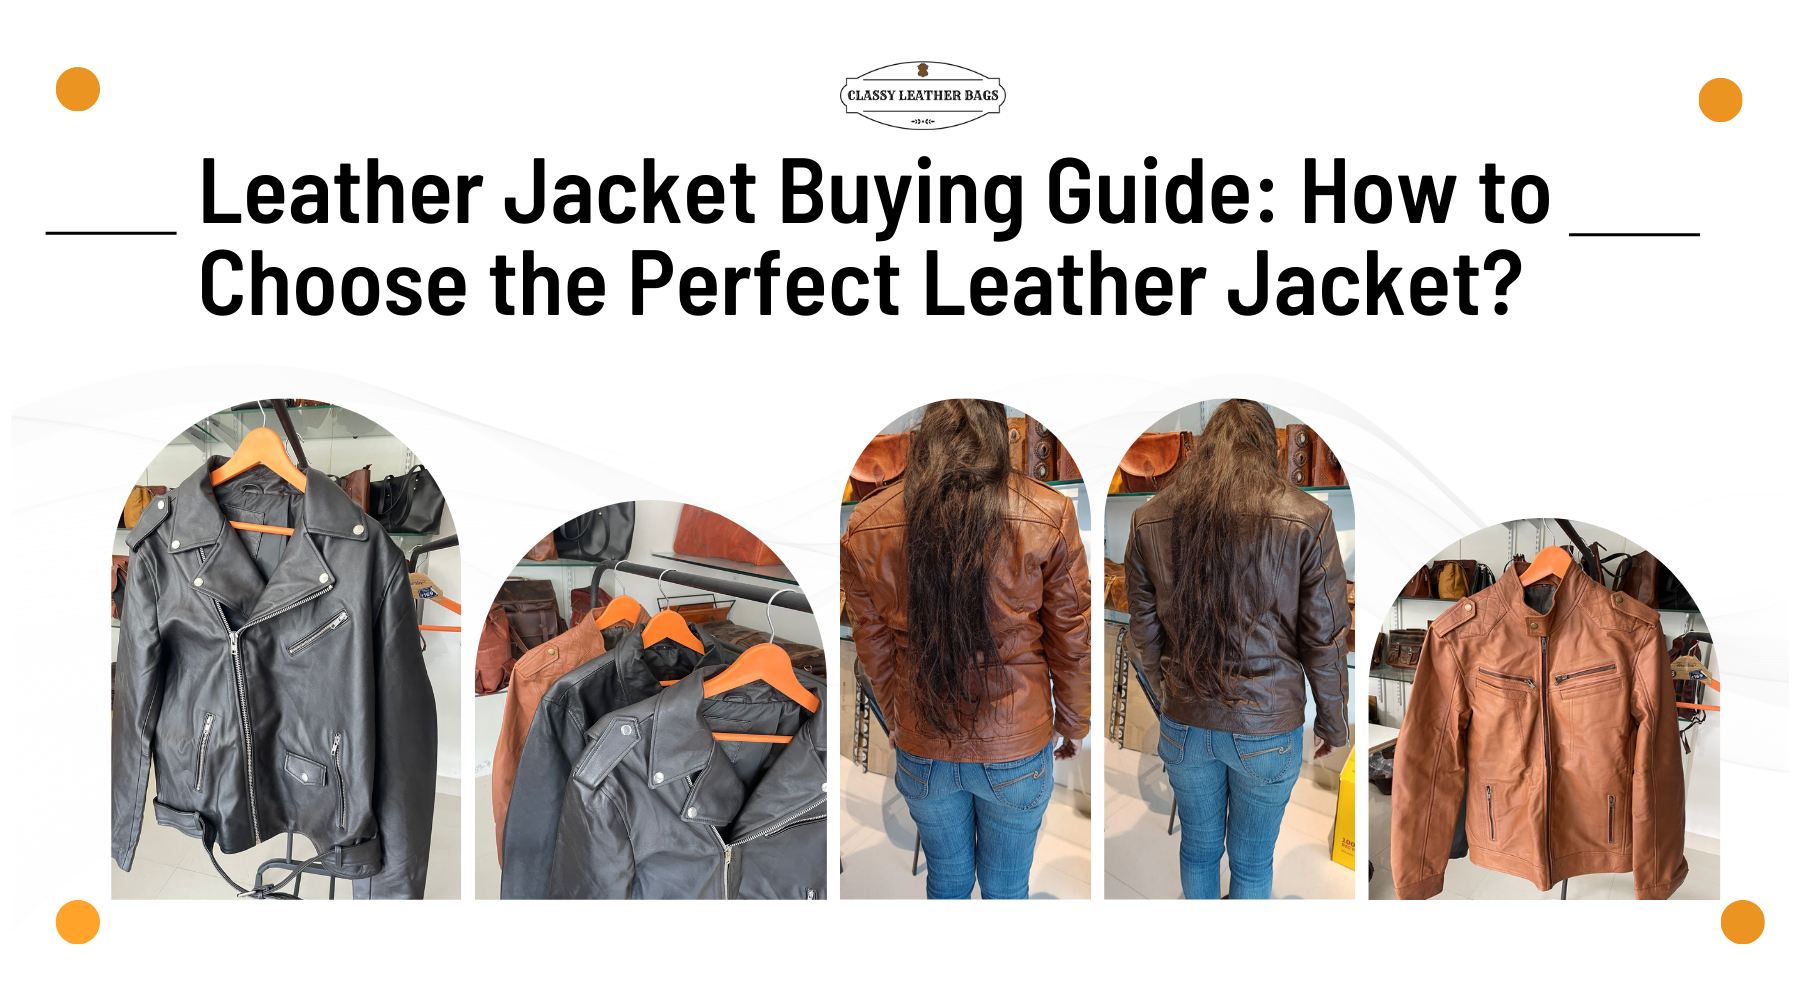 Introduction to Perfect Leather Jacket?